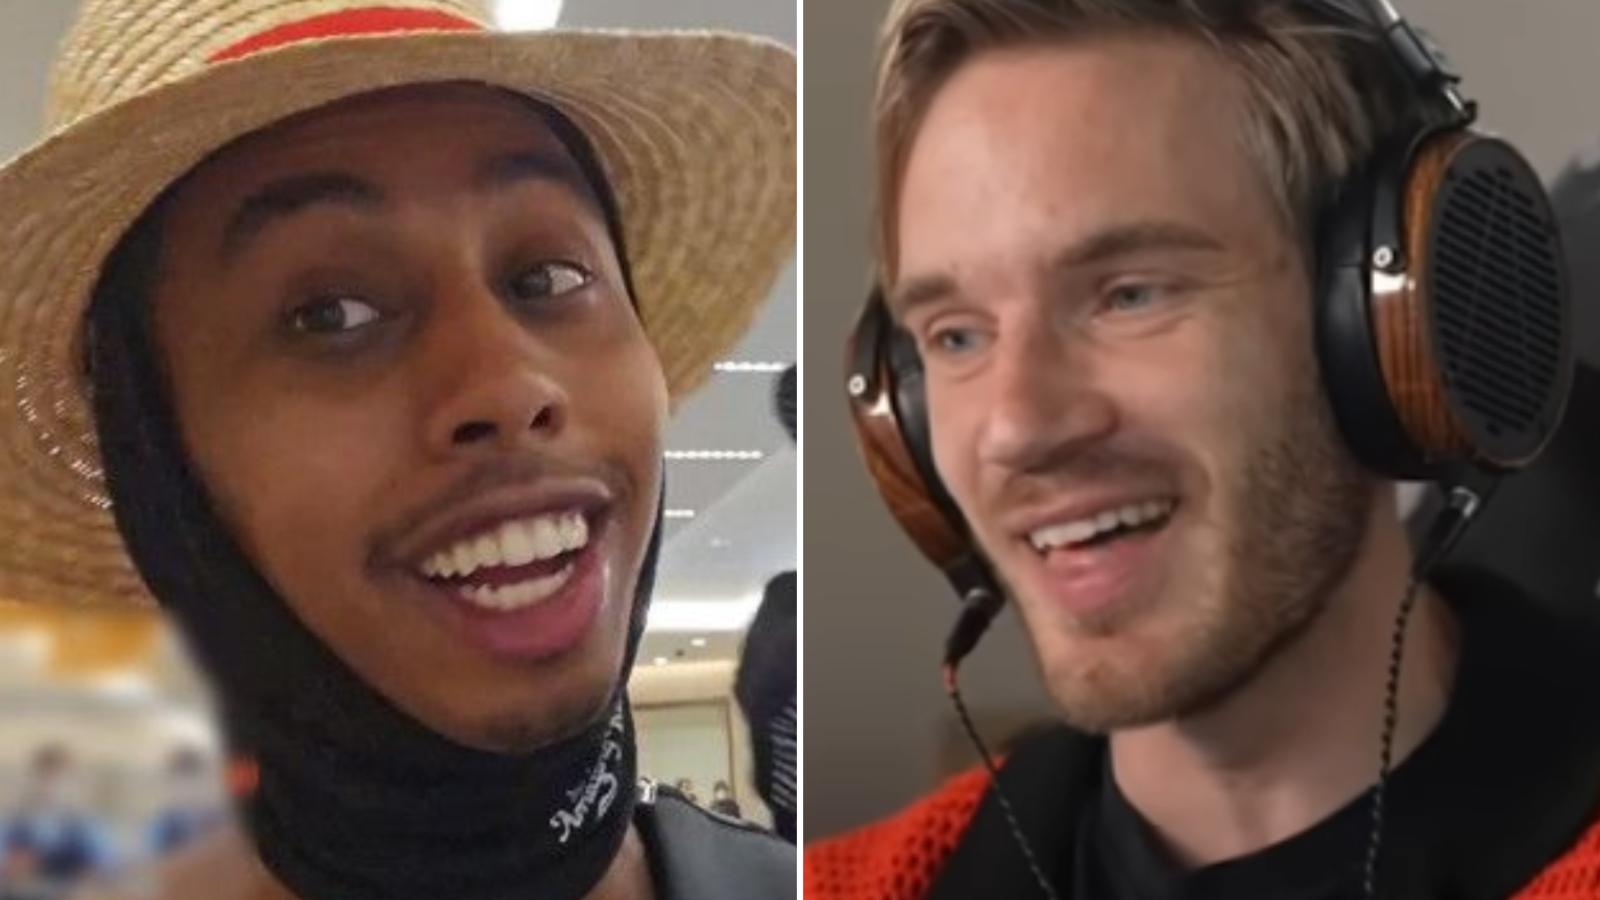 johnny somali and pewdiepie side-by-side